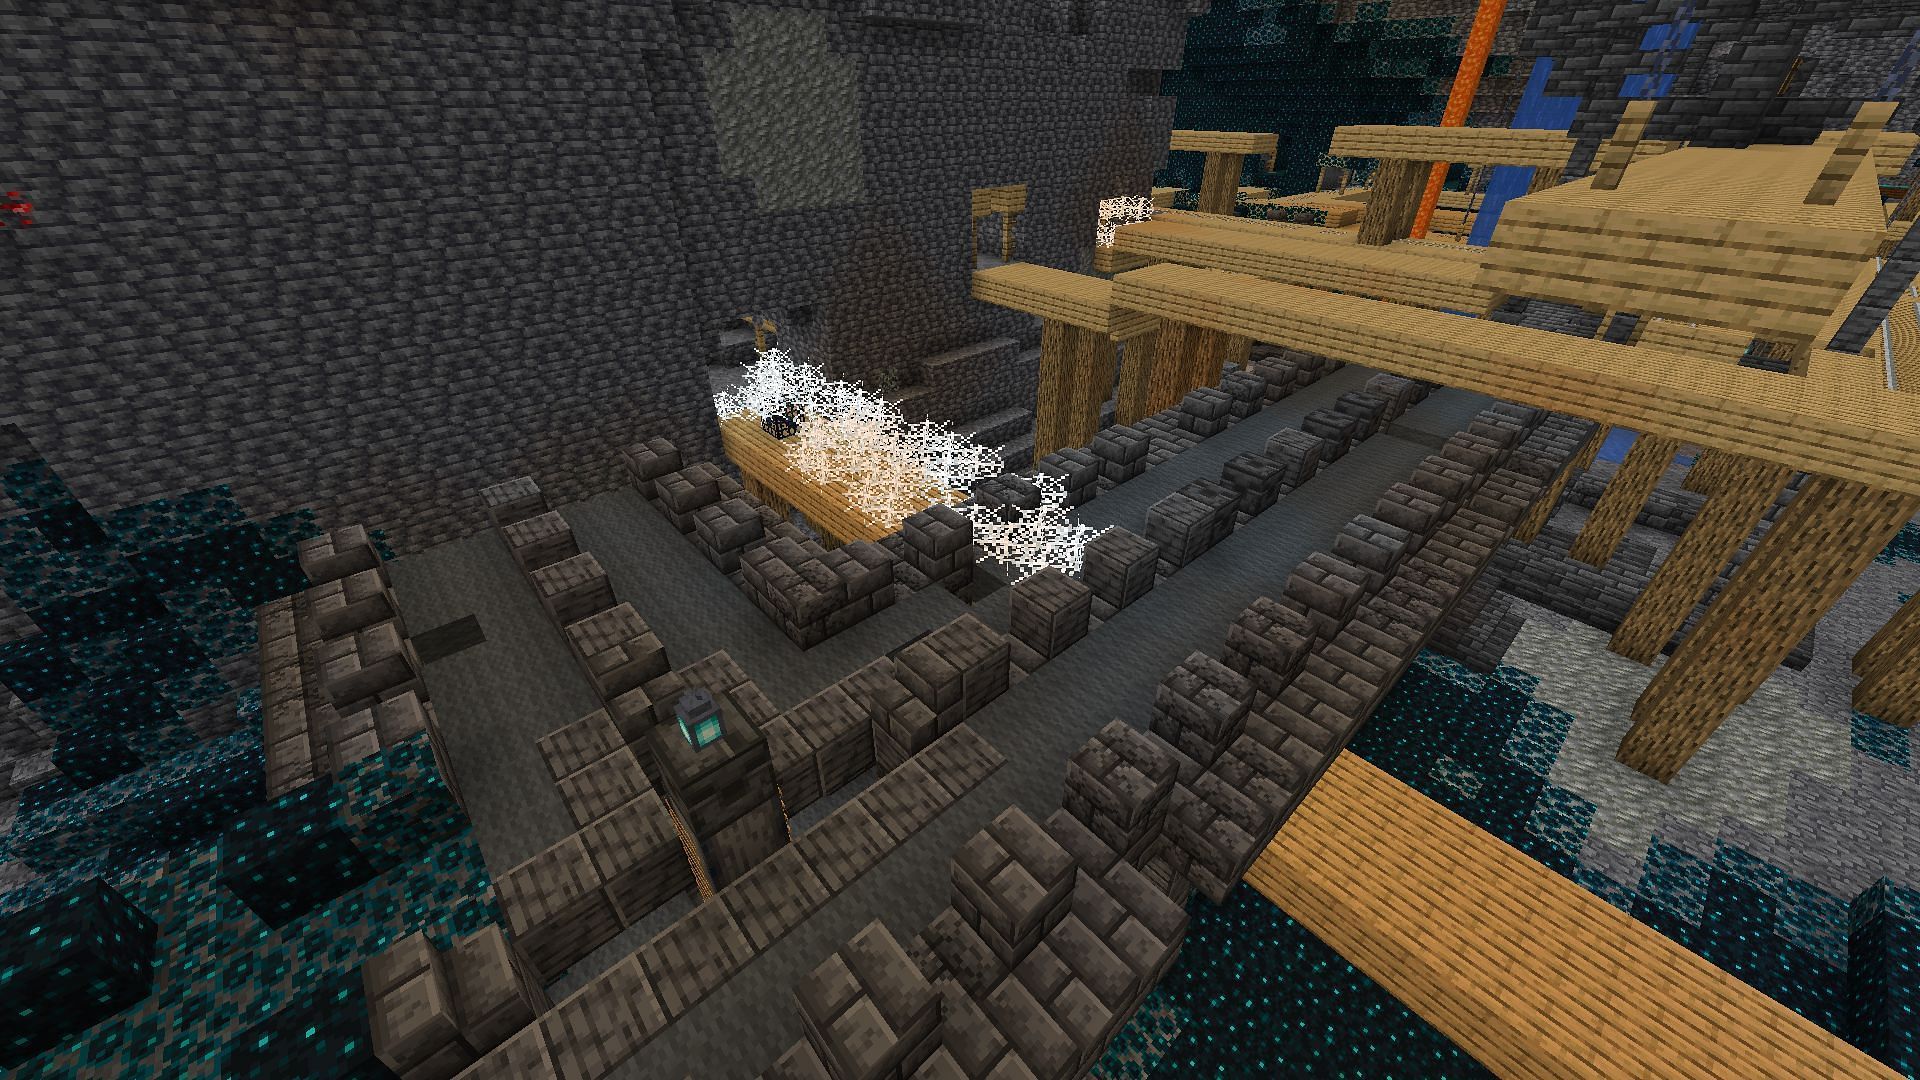 The ancient city with the cave spider spawner (Image via Minecraft)